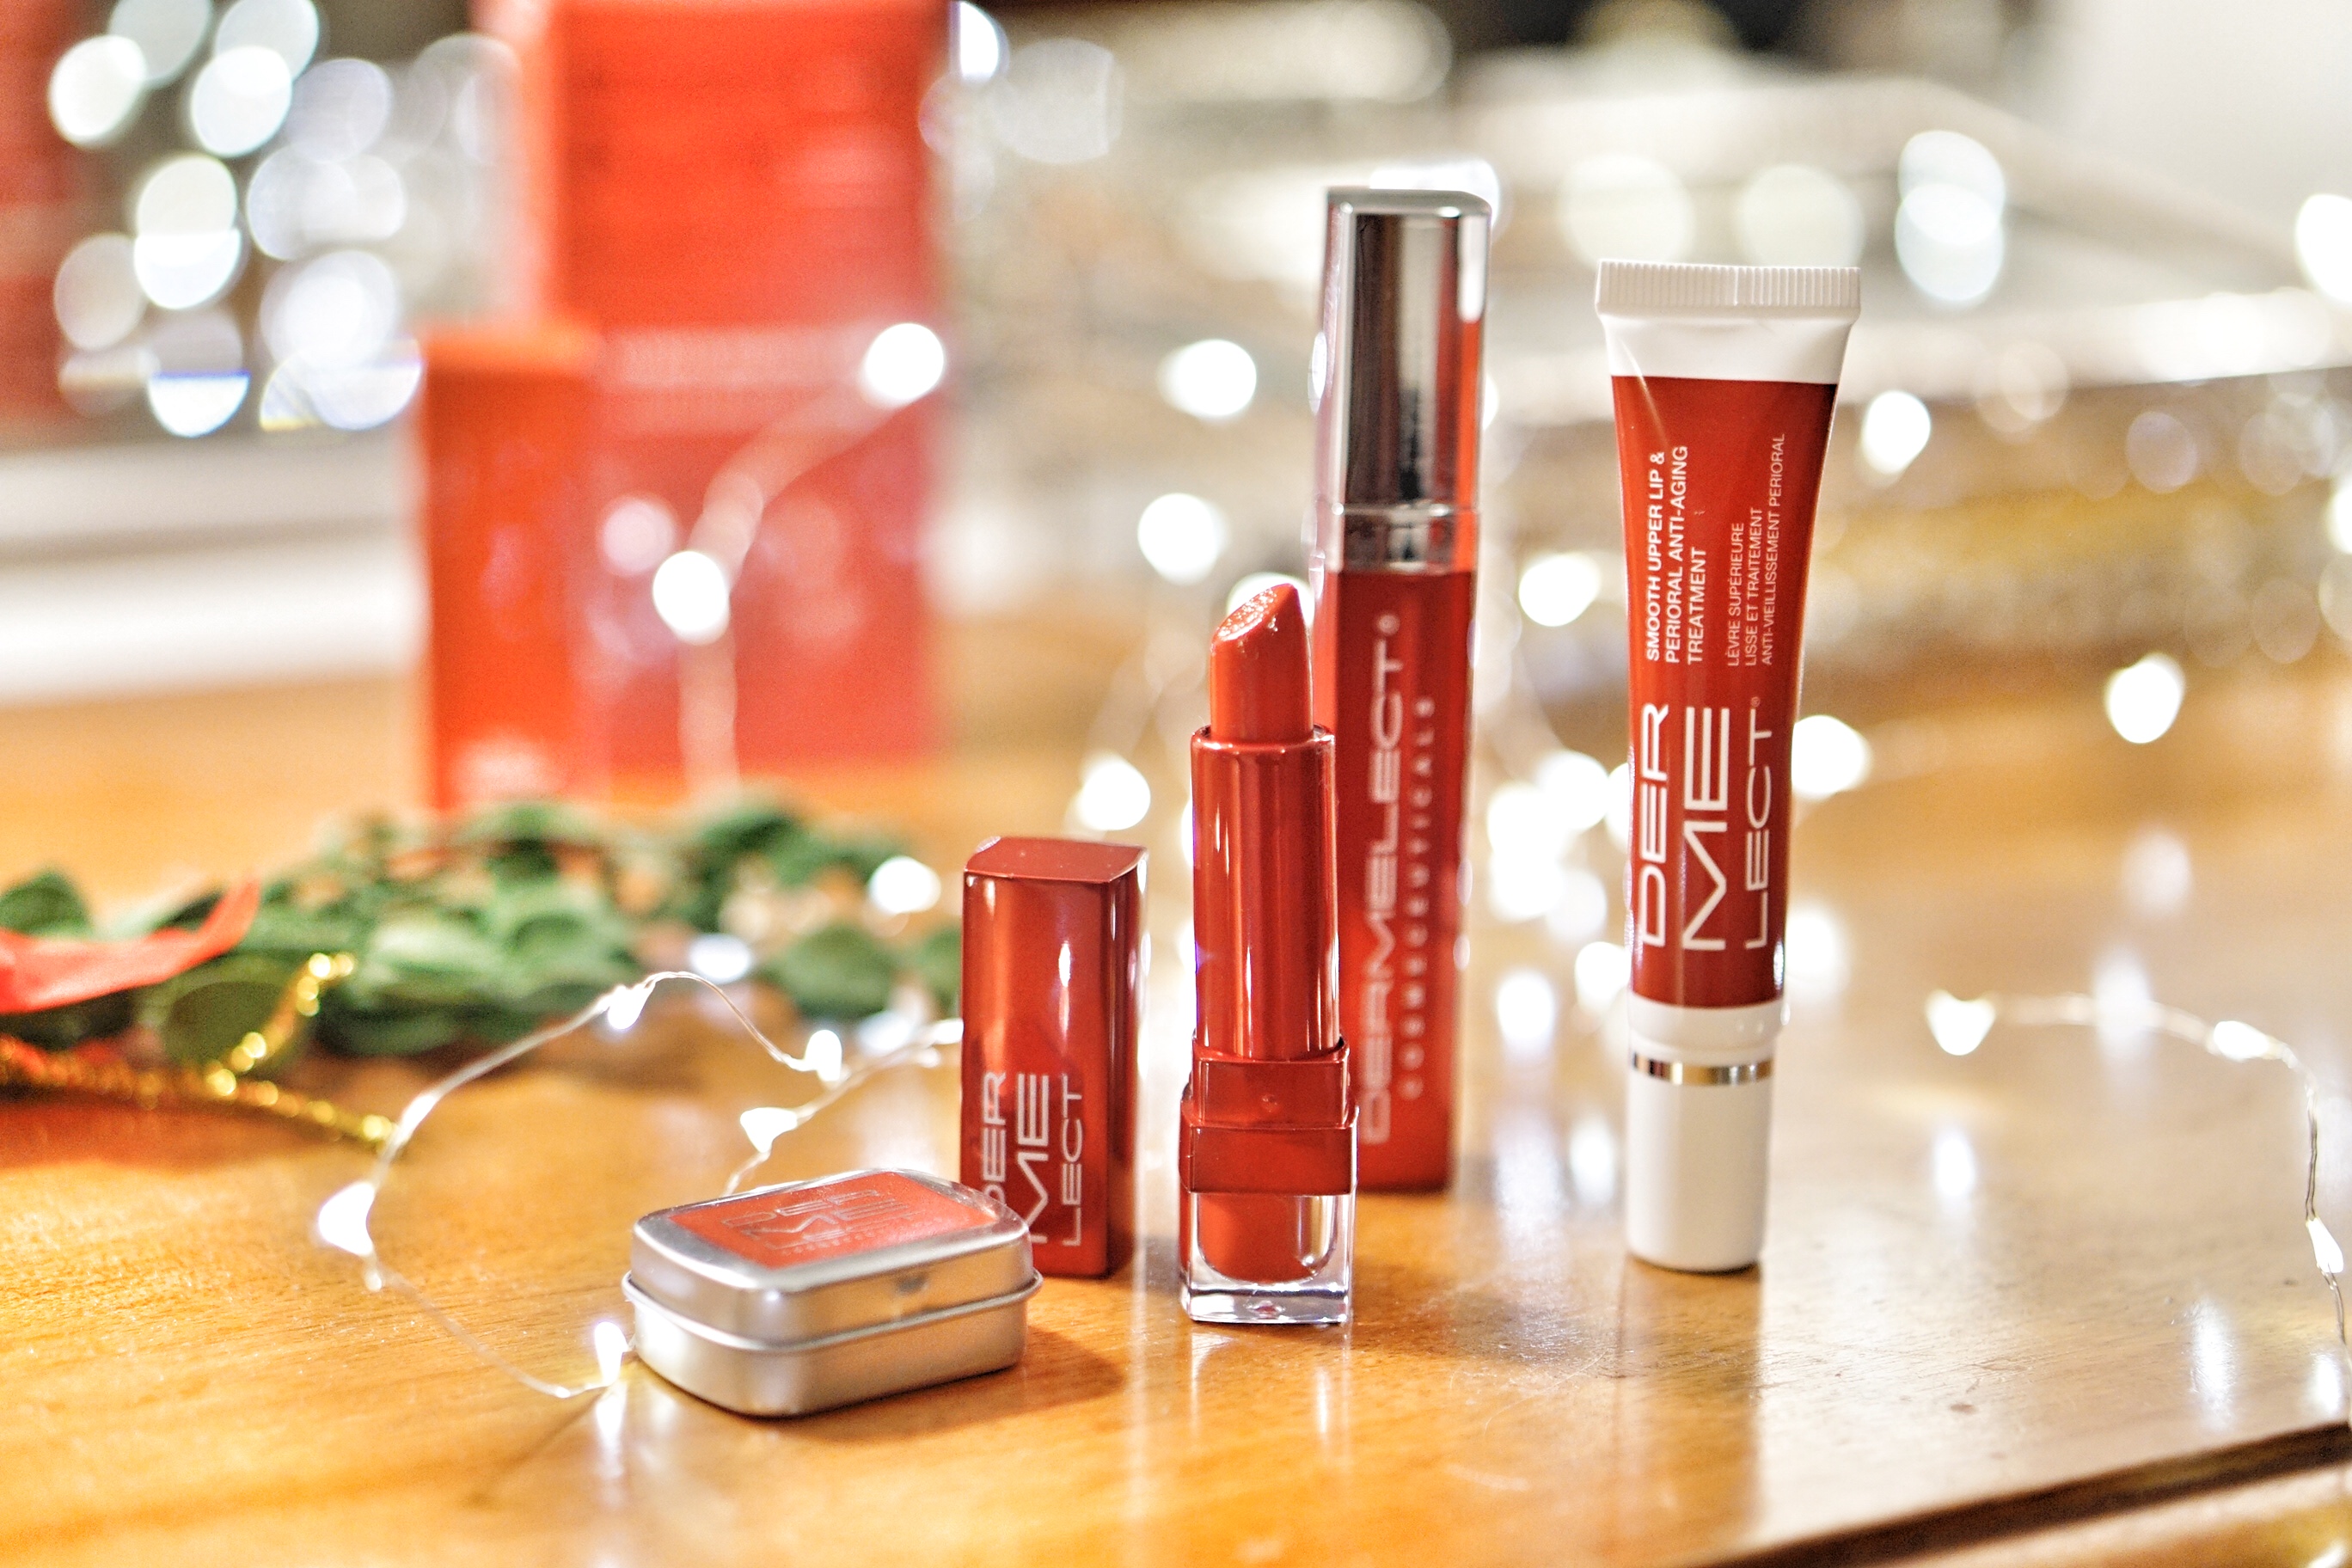 Get the ultimate smooth lips with Dermelect!